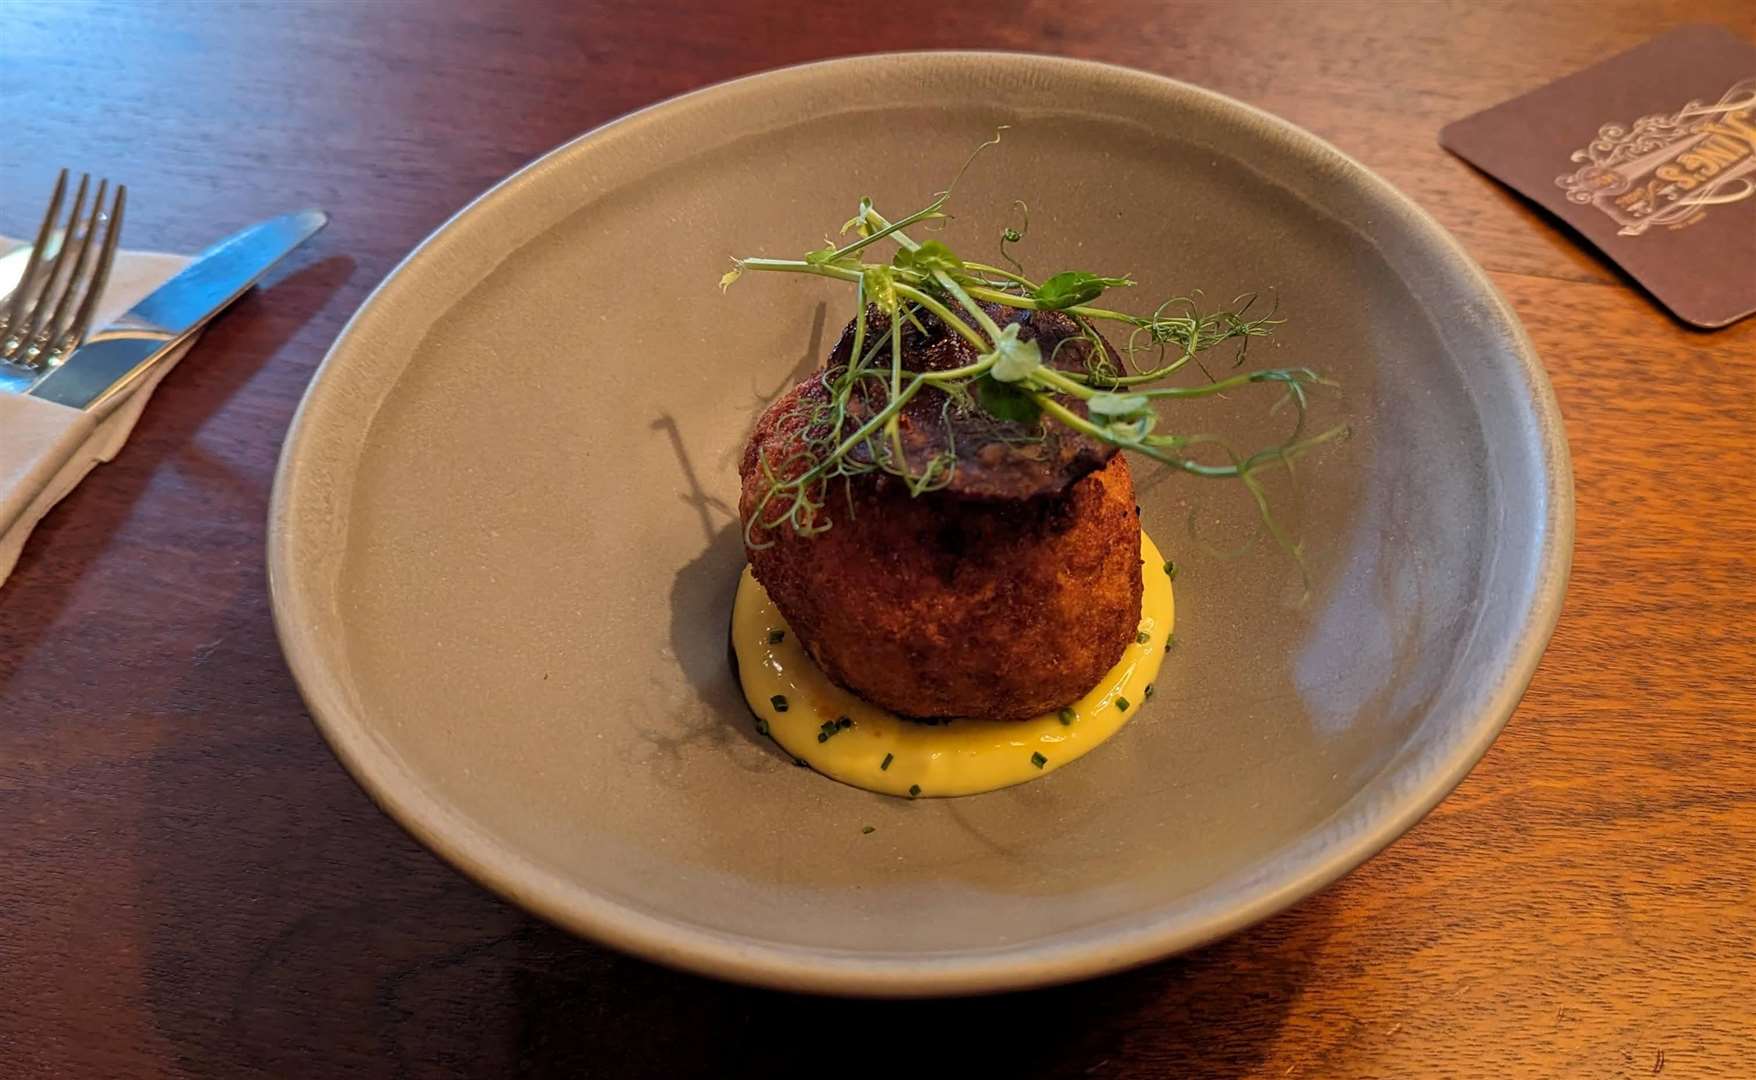 The scotch egg at the Kings Arms was worth the walk to reach it